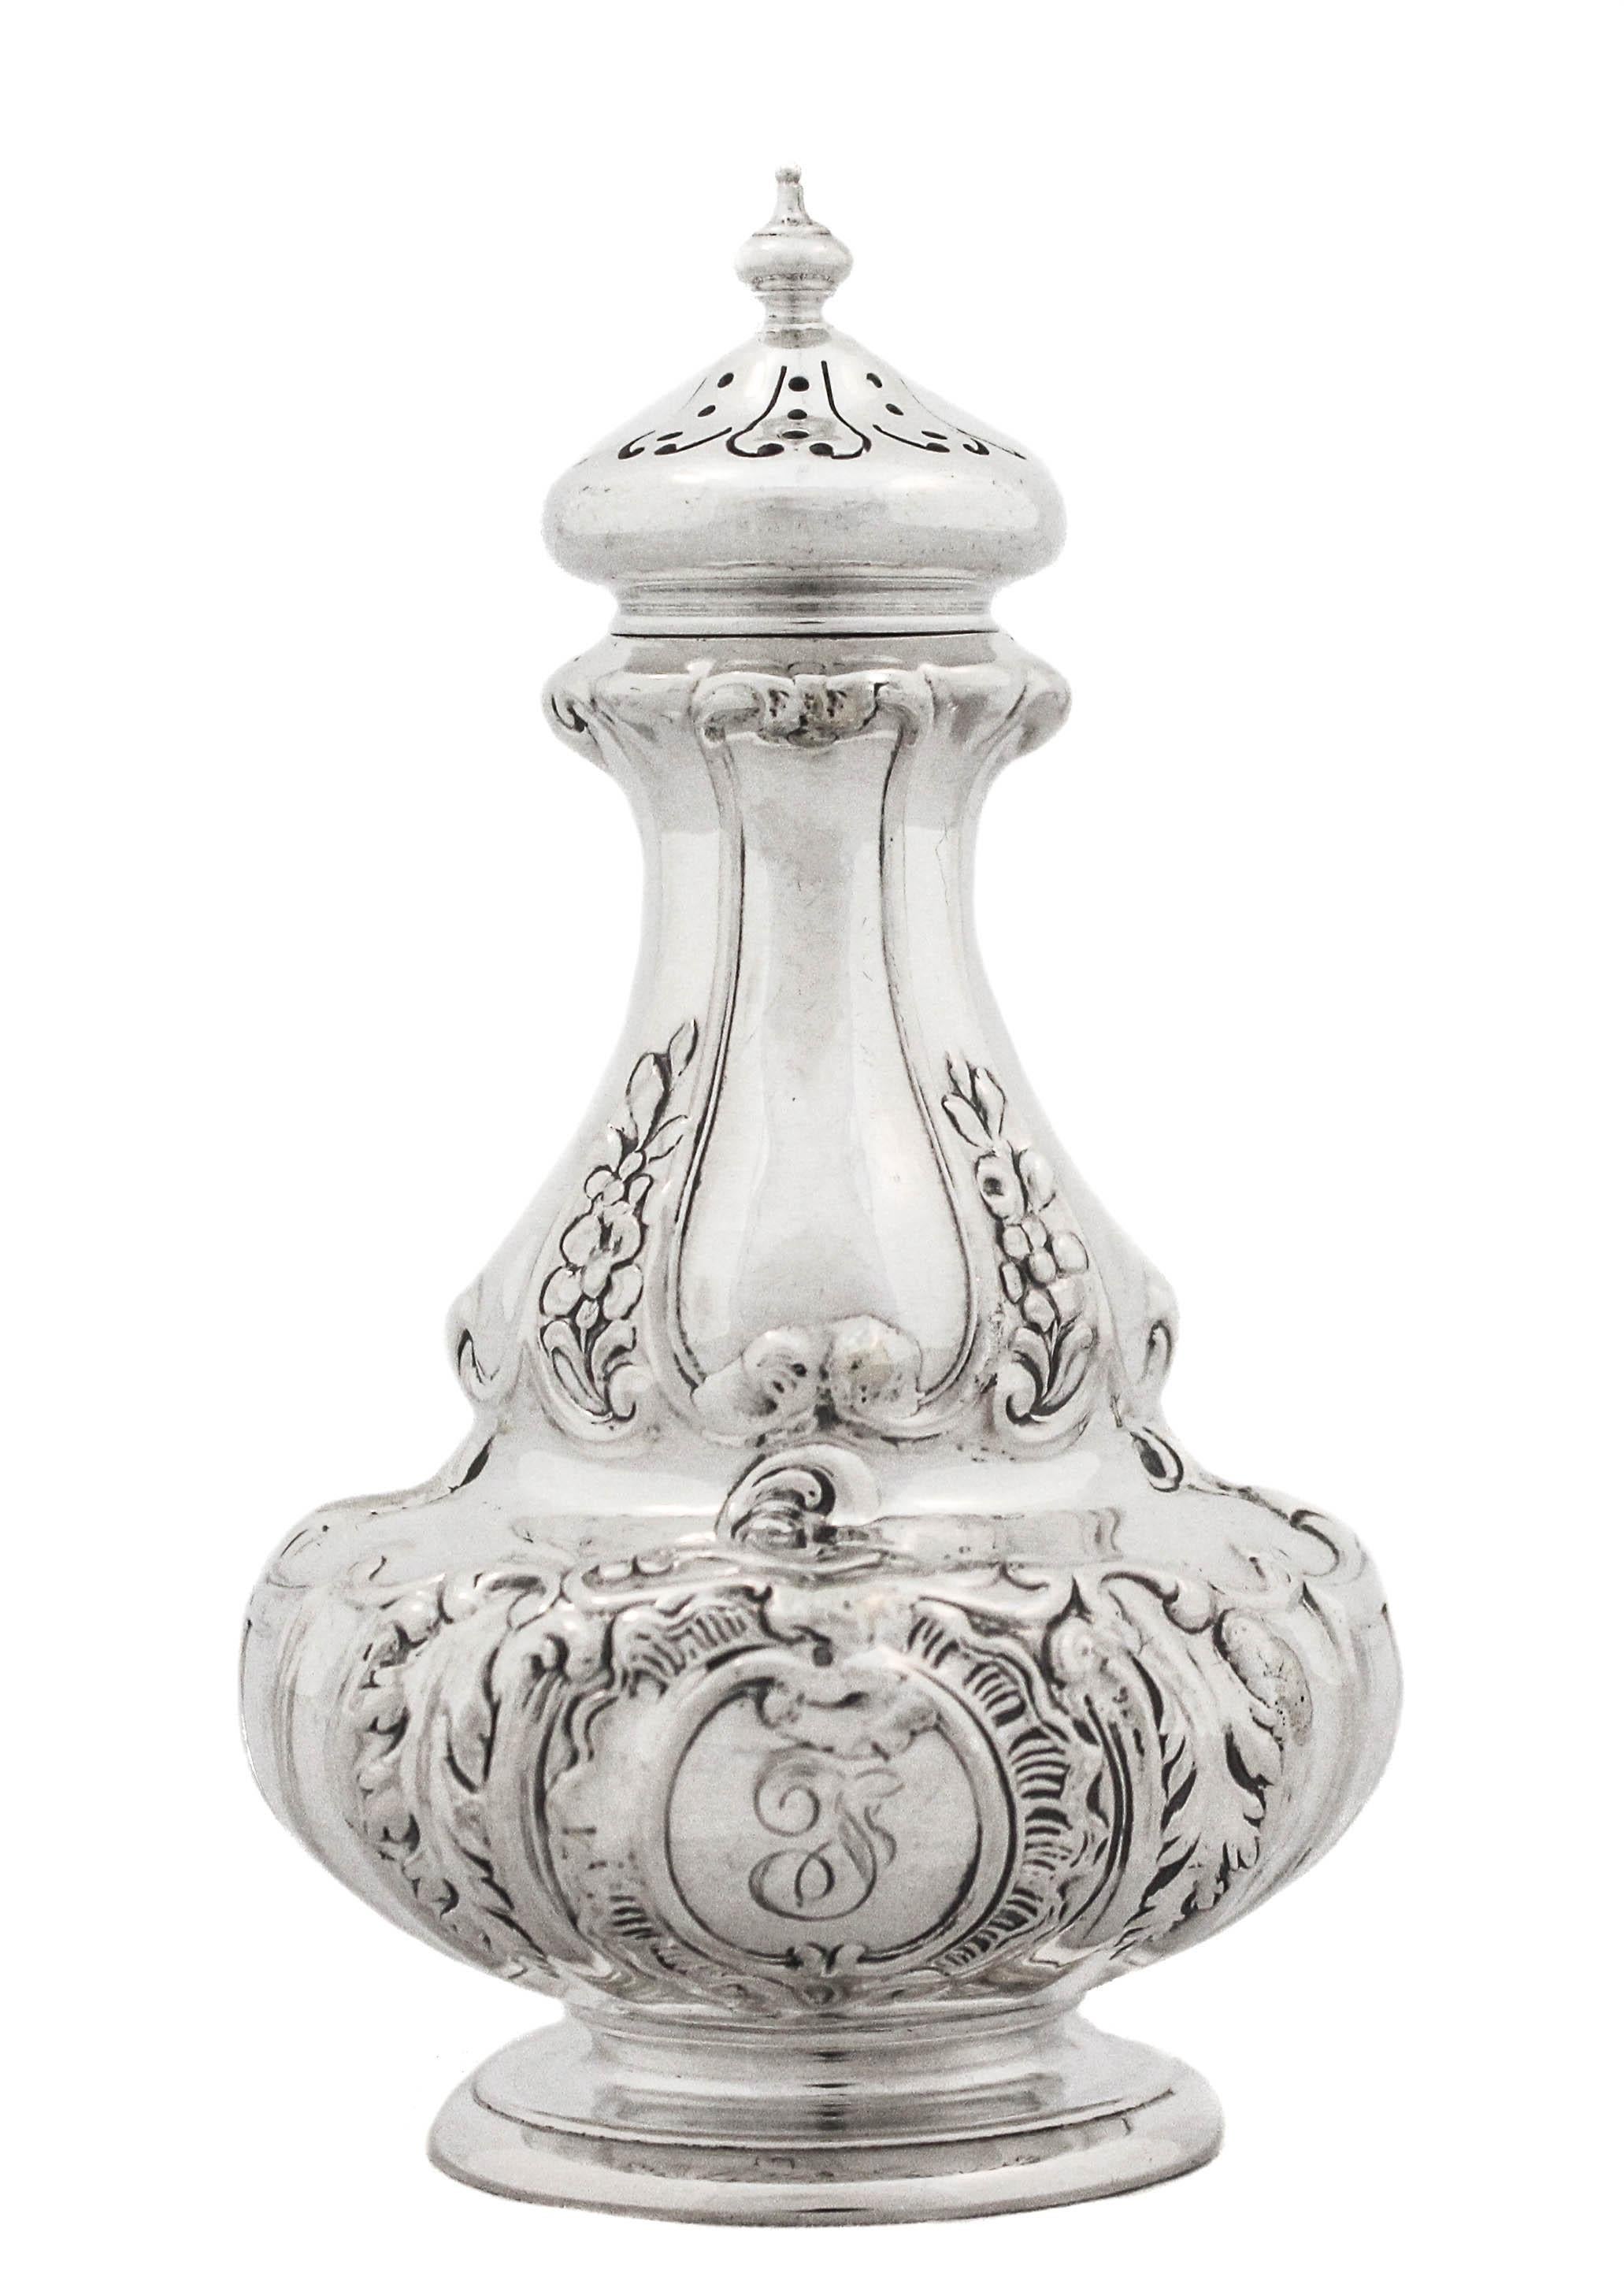 We are delighted to offer you these sterling silver salt shakers by Gorham Silversmiths, hallmarked 1900.  They have an old-world regalia that reflects the Gilded Age of the 19th century.  Ornate with a floral motif and a reticulated top, they stand